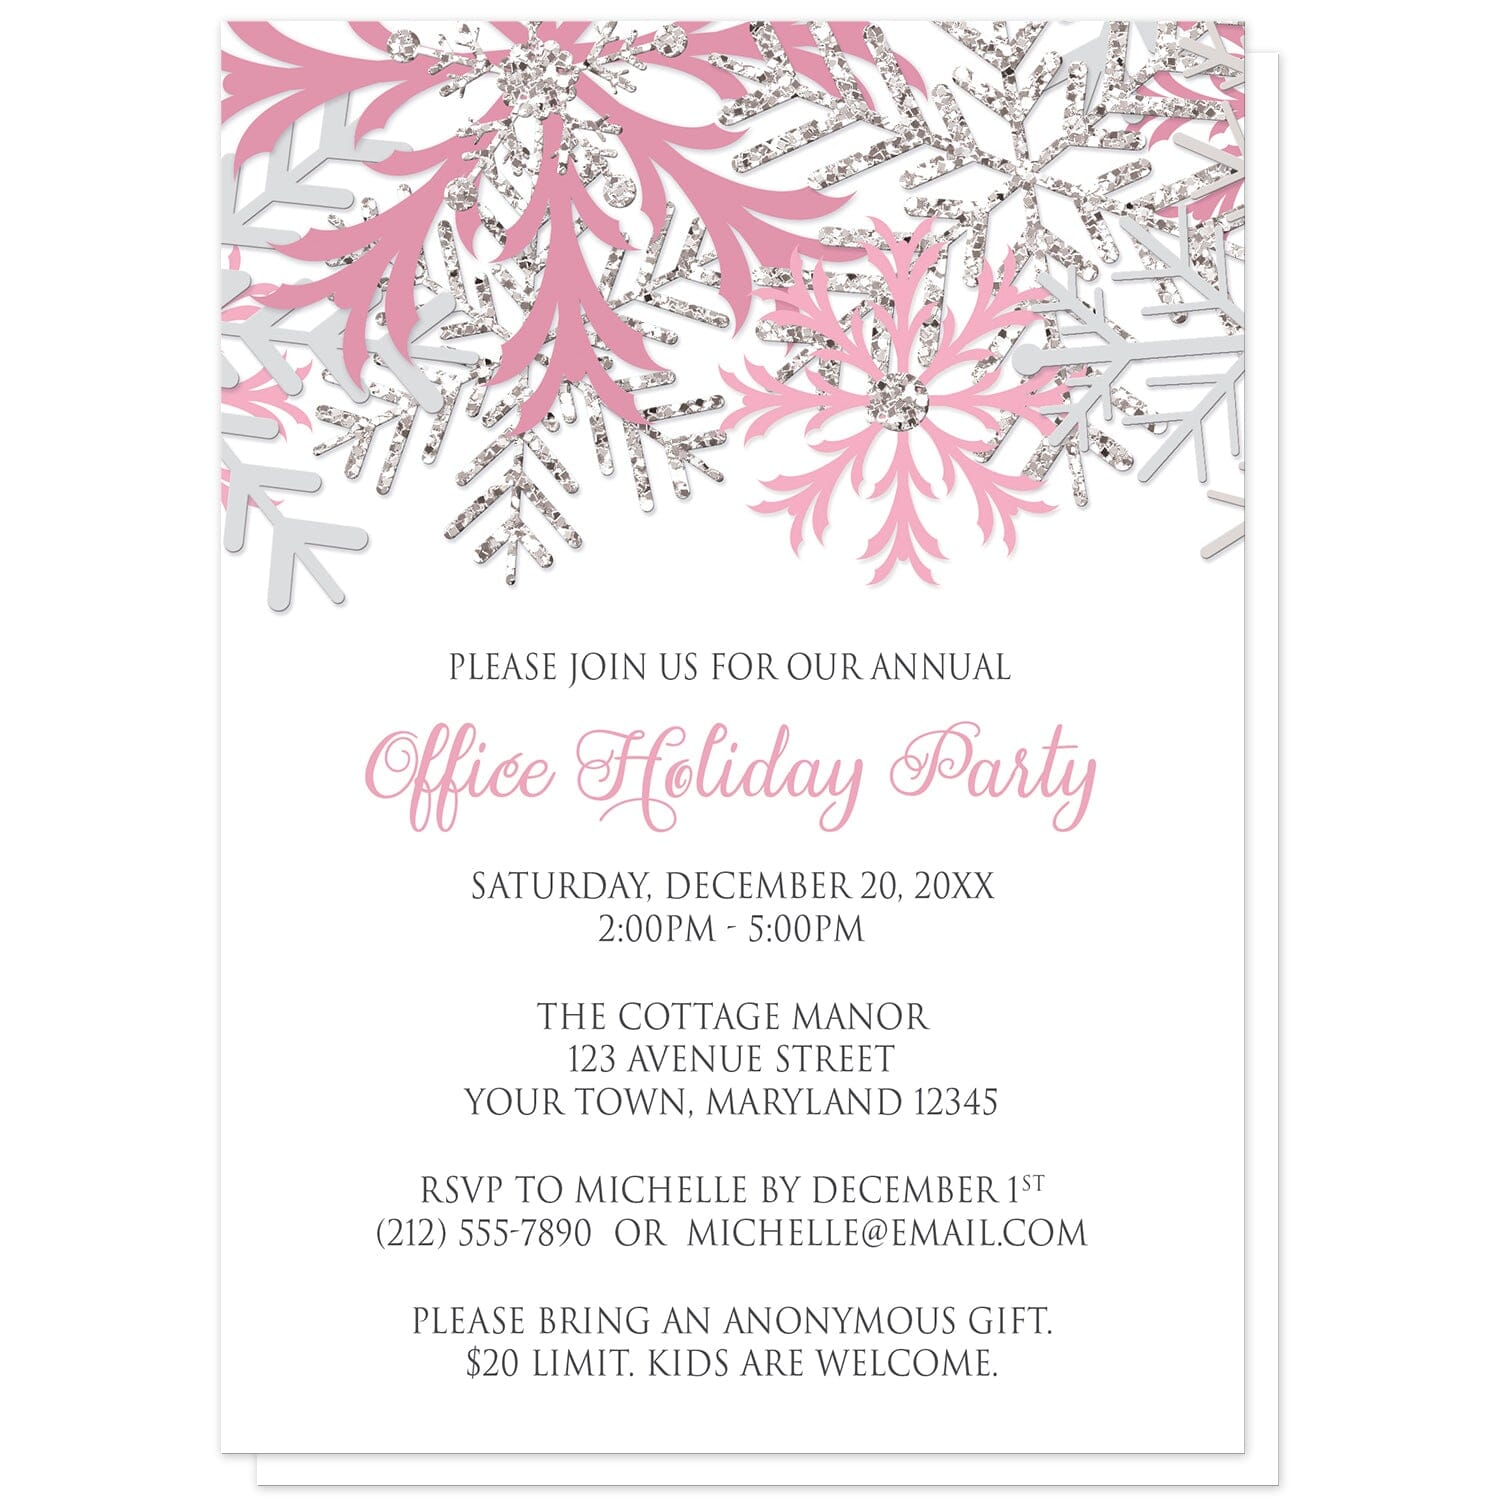 Winter Pink Silver Snowflake Holiday Party Invitations at Artistically Invited. Winter pink silver snowflake holiday party invitations with pink, light pink, and silver-colored glitter-illustrated snowflakes over a white background. Your personalized party details for your home or office party are custom printed in gray and pink. The occasion title is printed in a whimsical pink script font while your remaining details are printed in an all-capital letters gray serif font.